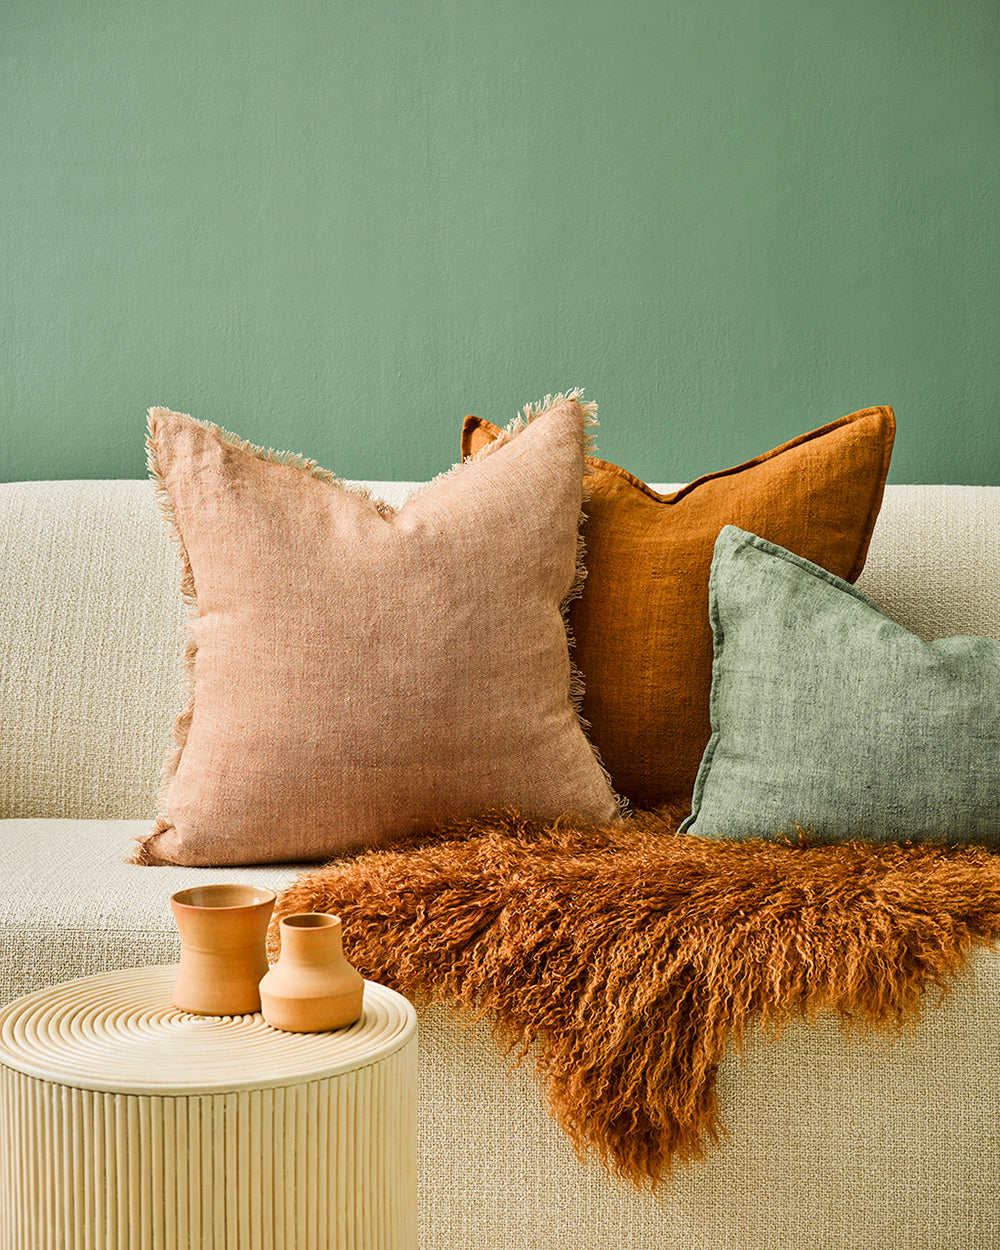 Keaton Linen cushion in cinnamon with tobacco and great cushions and lamb fur throw on cream couch with sage green background